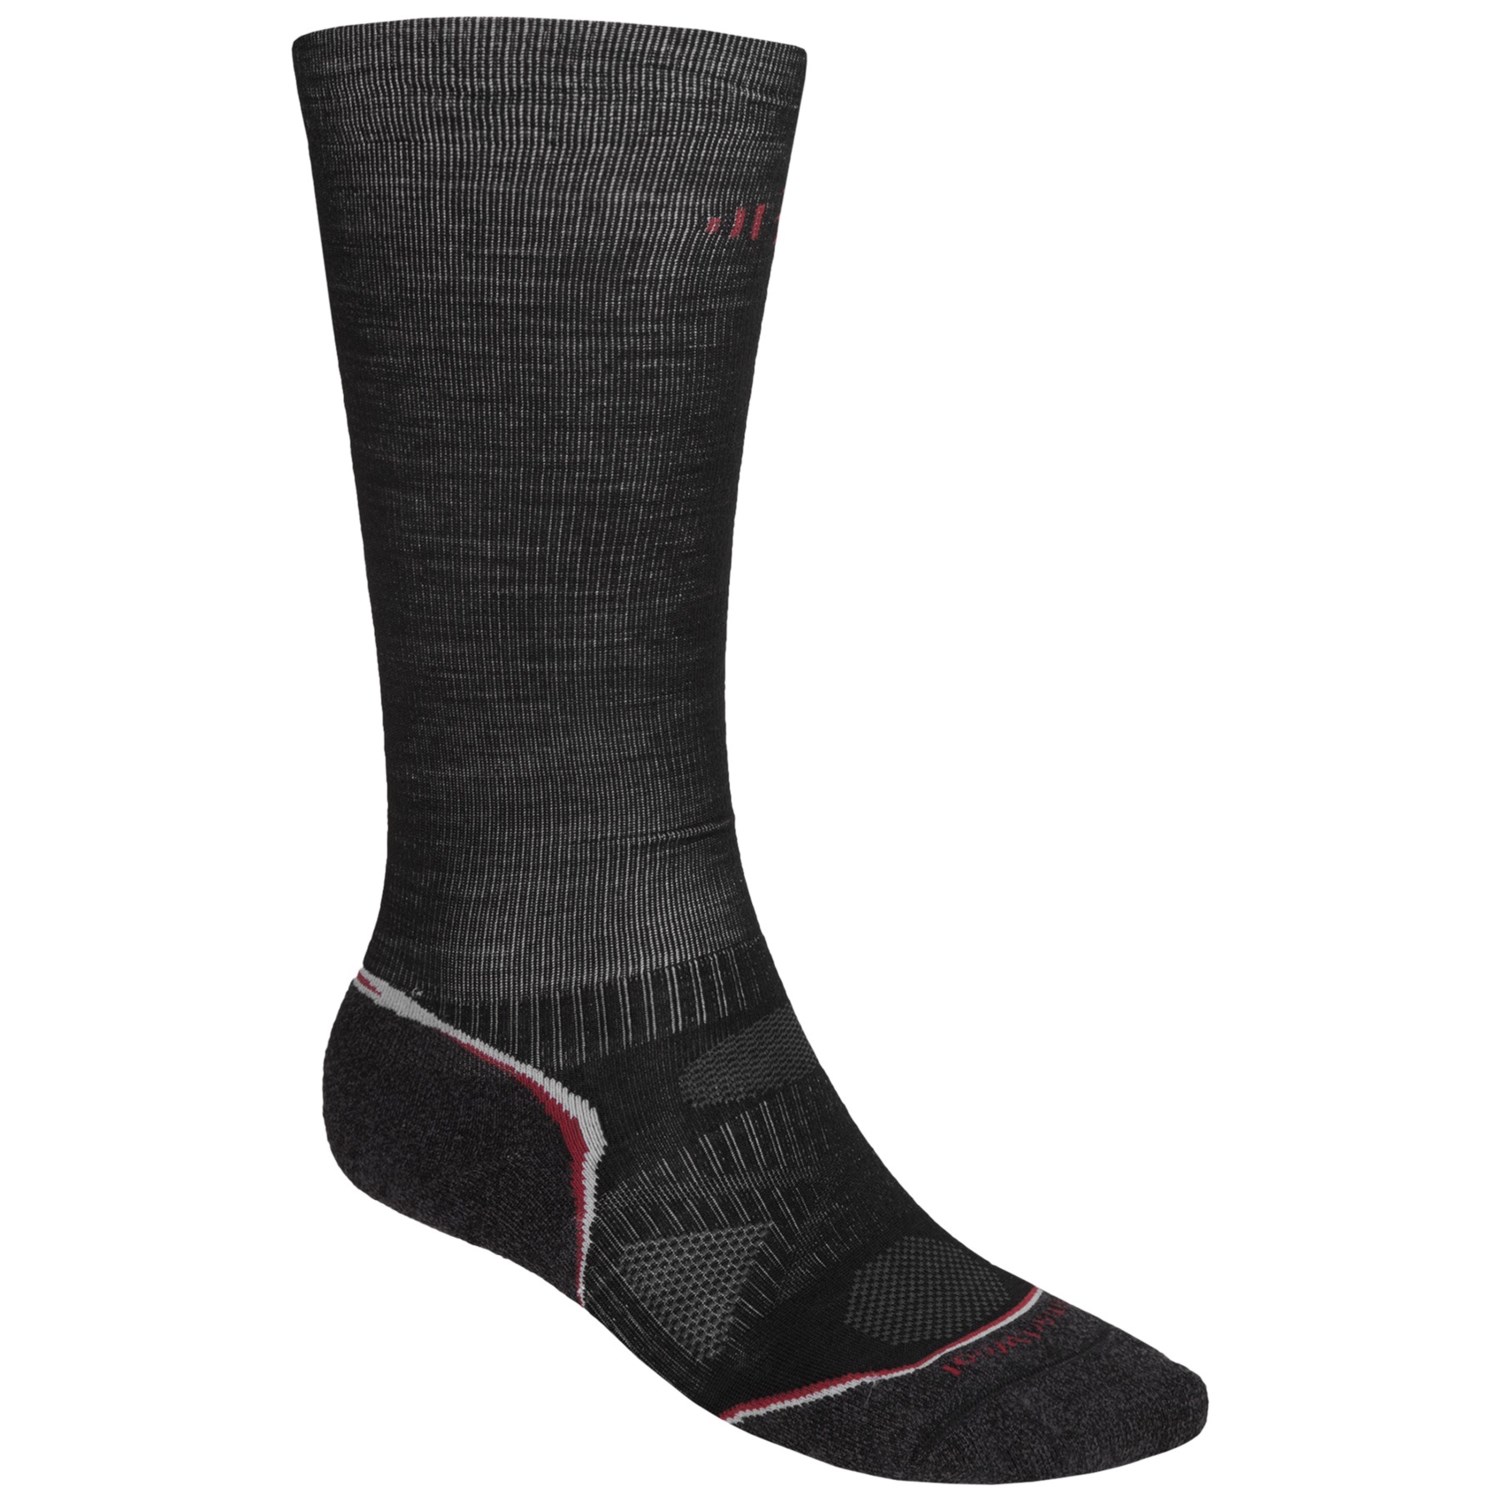  Graduated Compression Socks  Merino Wool For Men and Women in Black